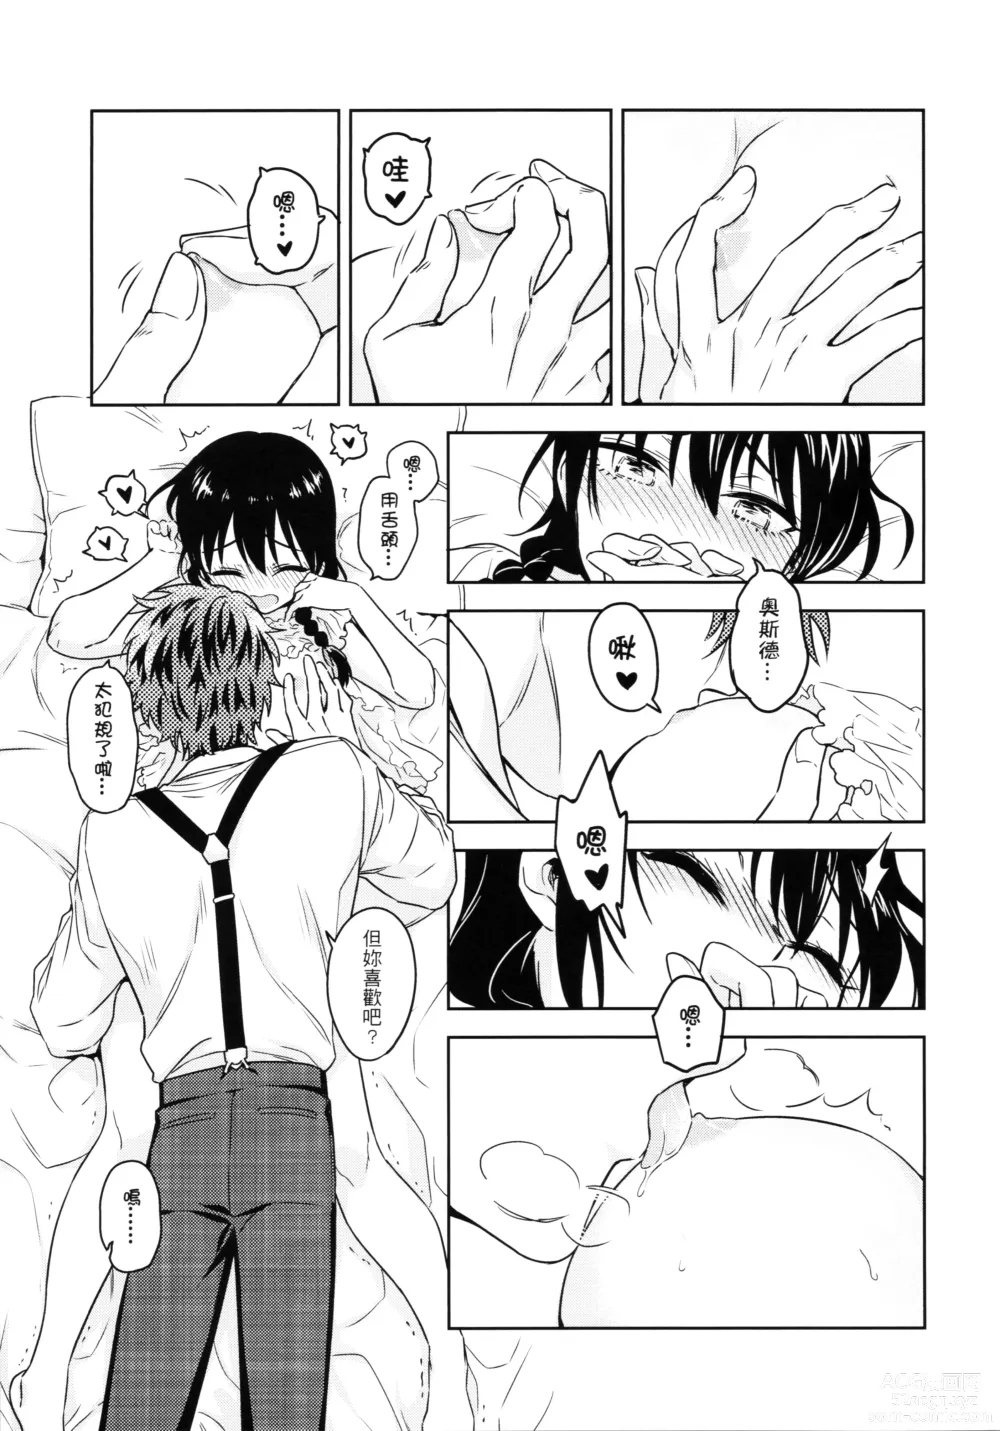 Page 10 of doujinshi My Dear Gift